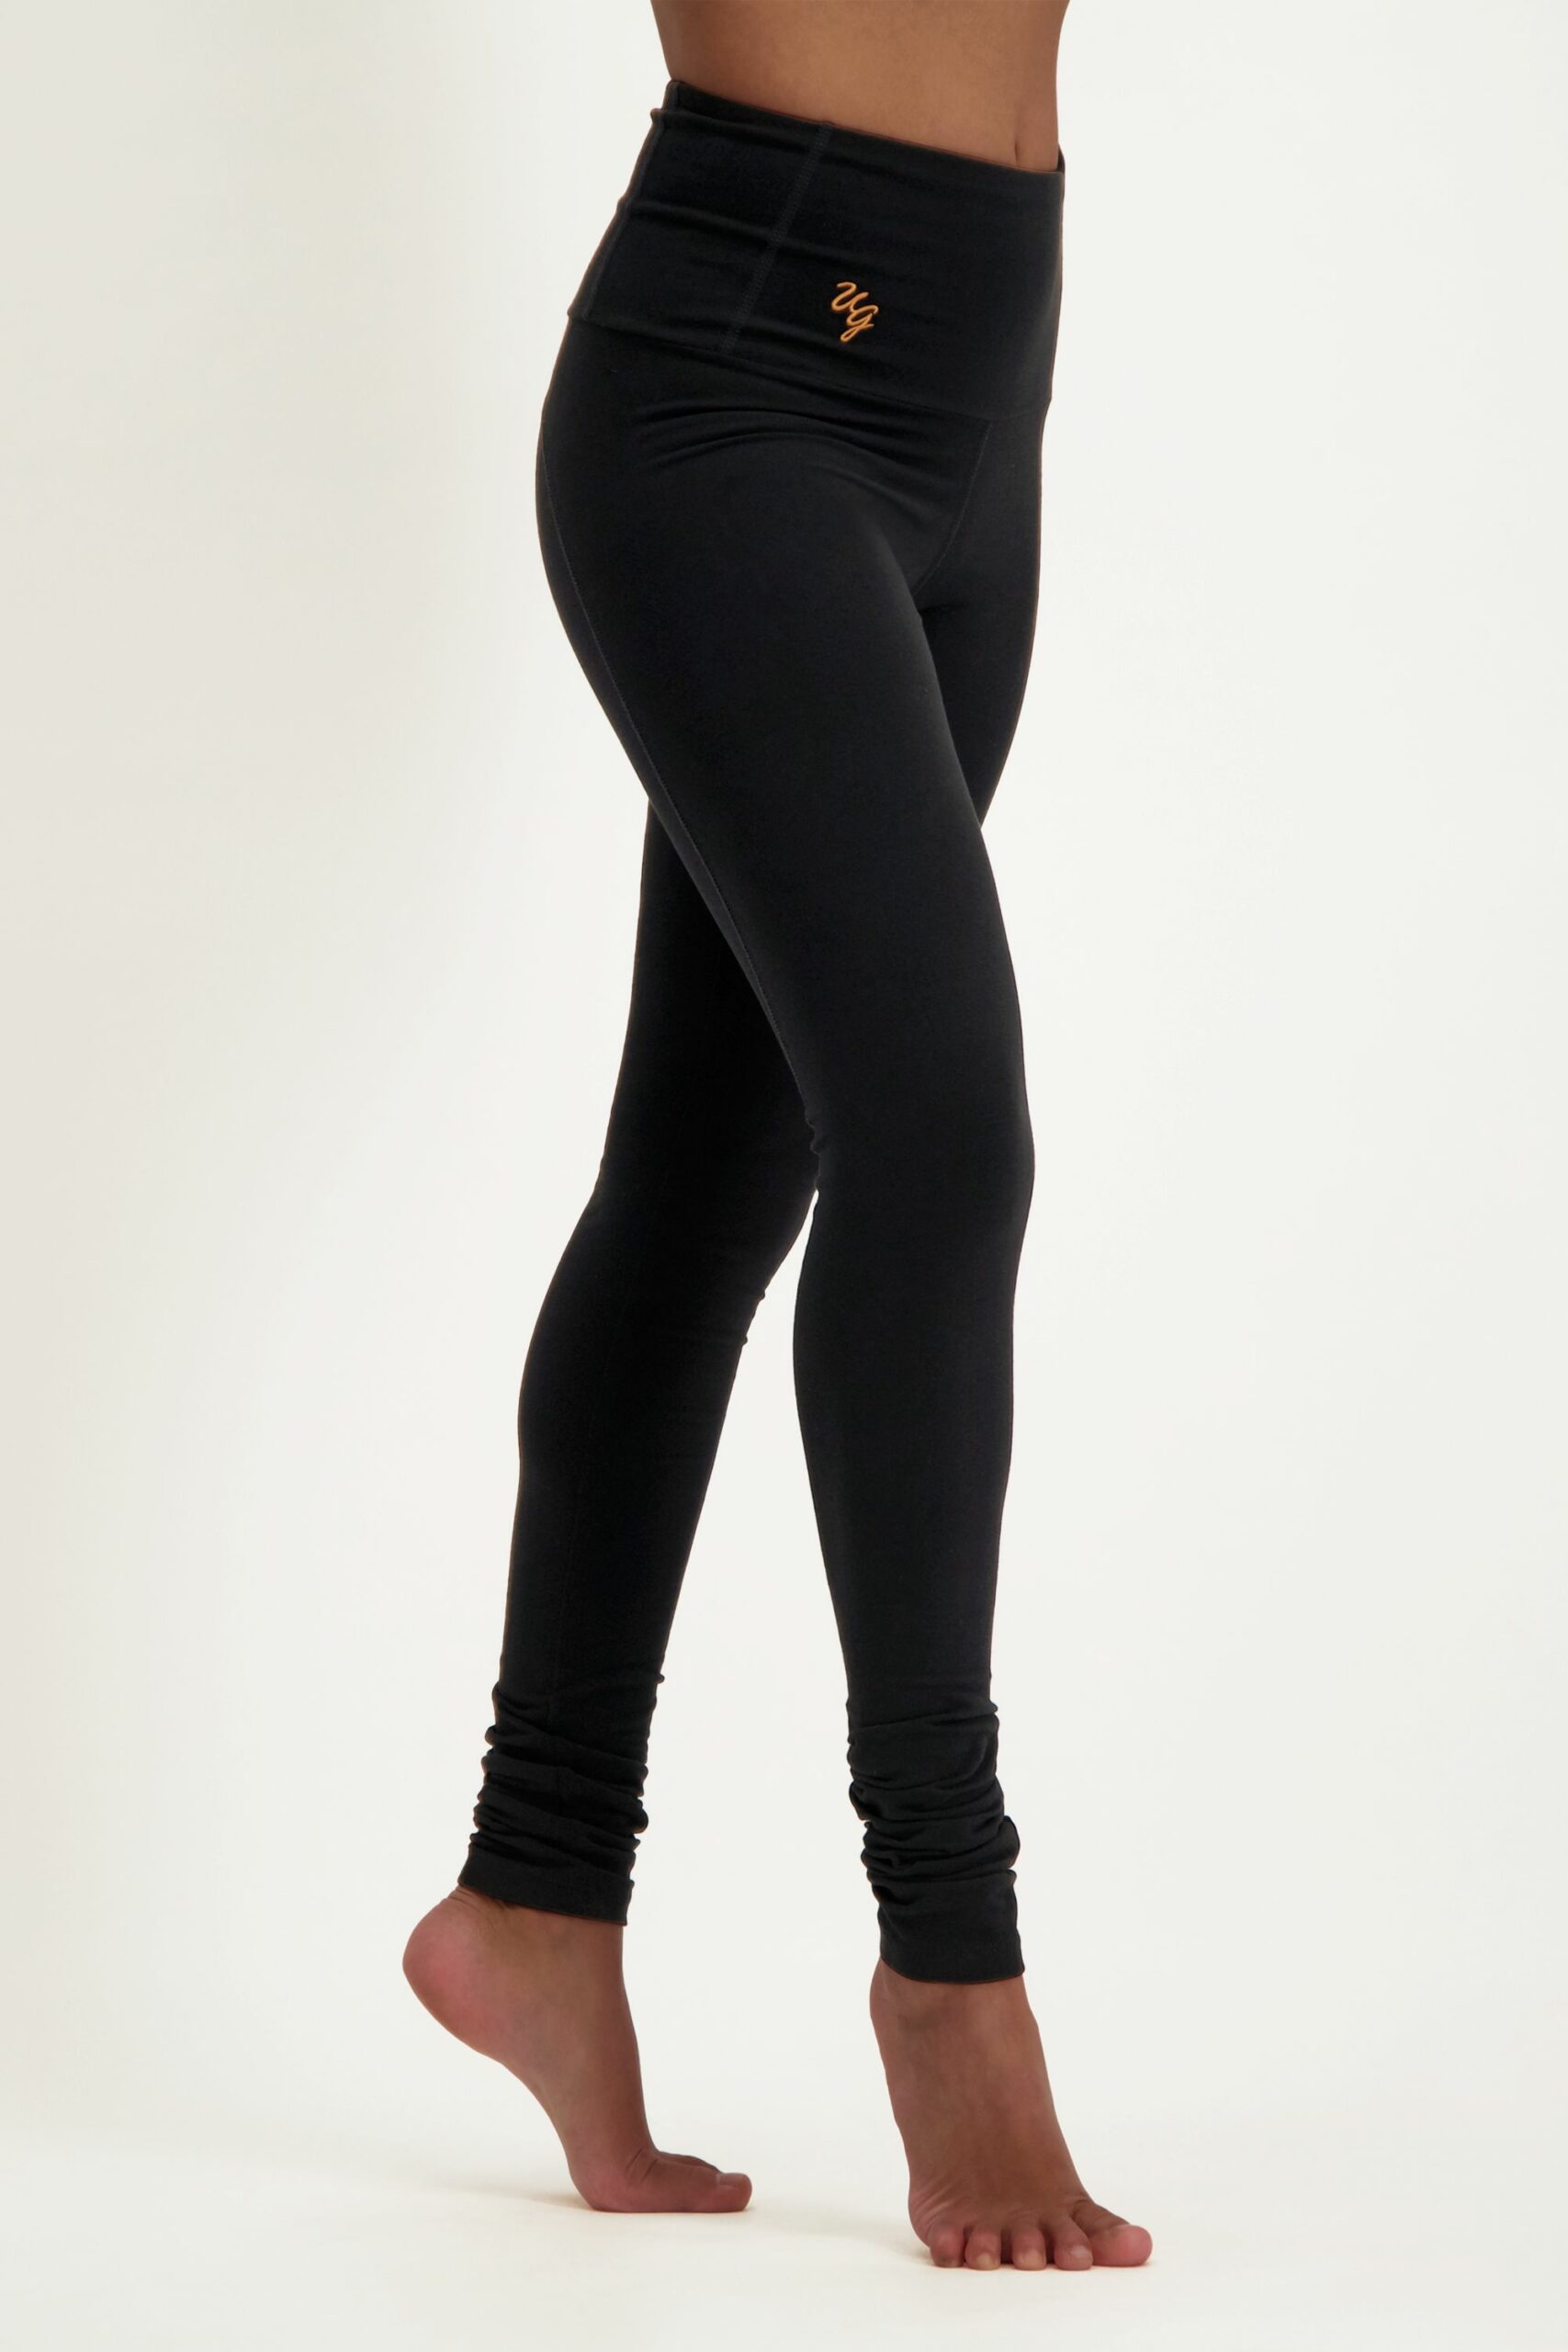 Reflective Glow In The Dark Leggings And Black Yoga Pants Set With Stripes  For Women Perfect For Fitness, Yoga, And Sports From Air11, $6.22